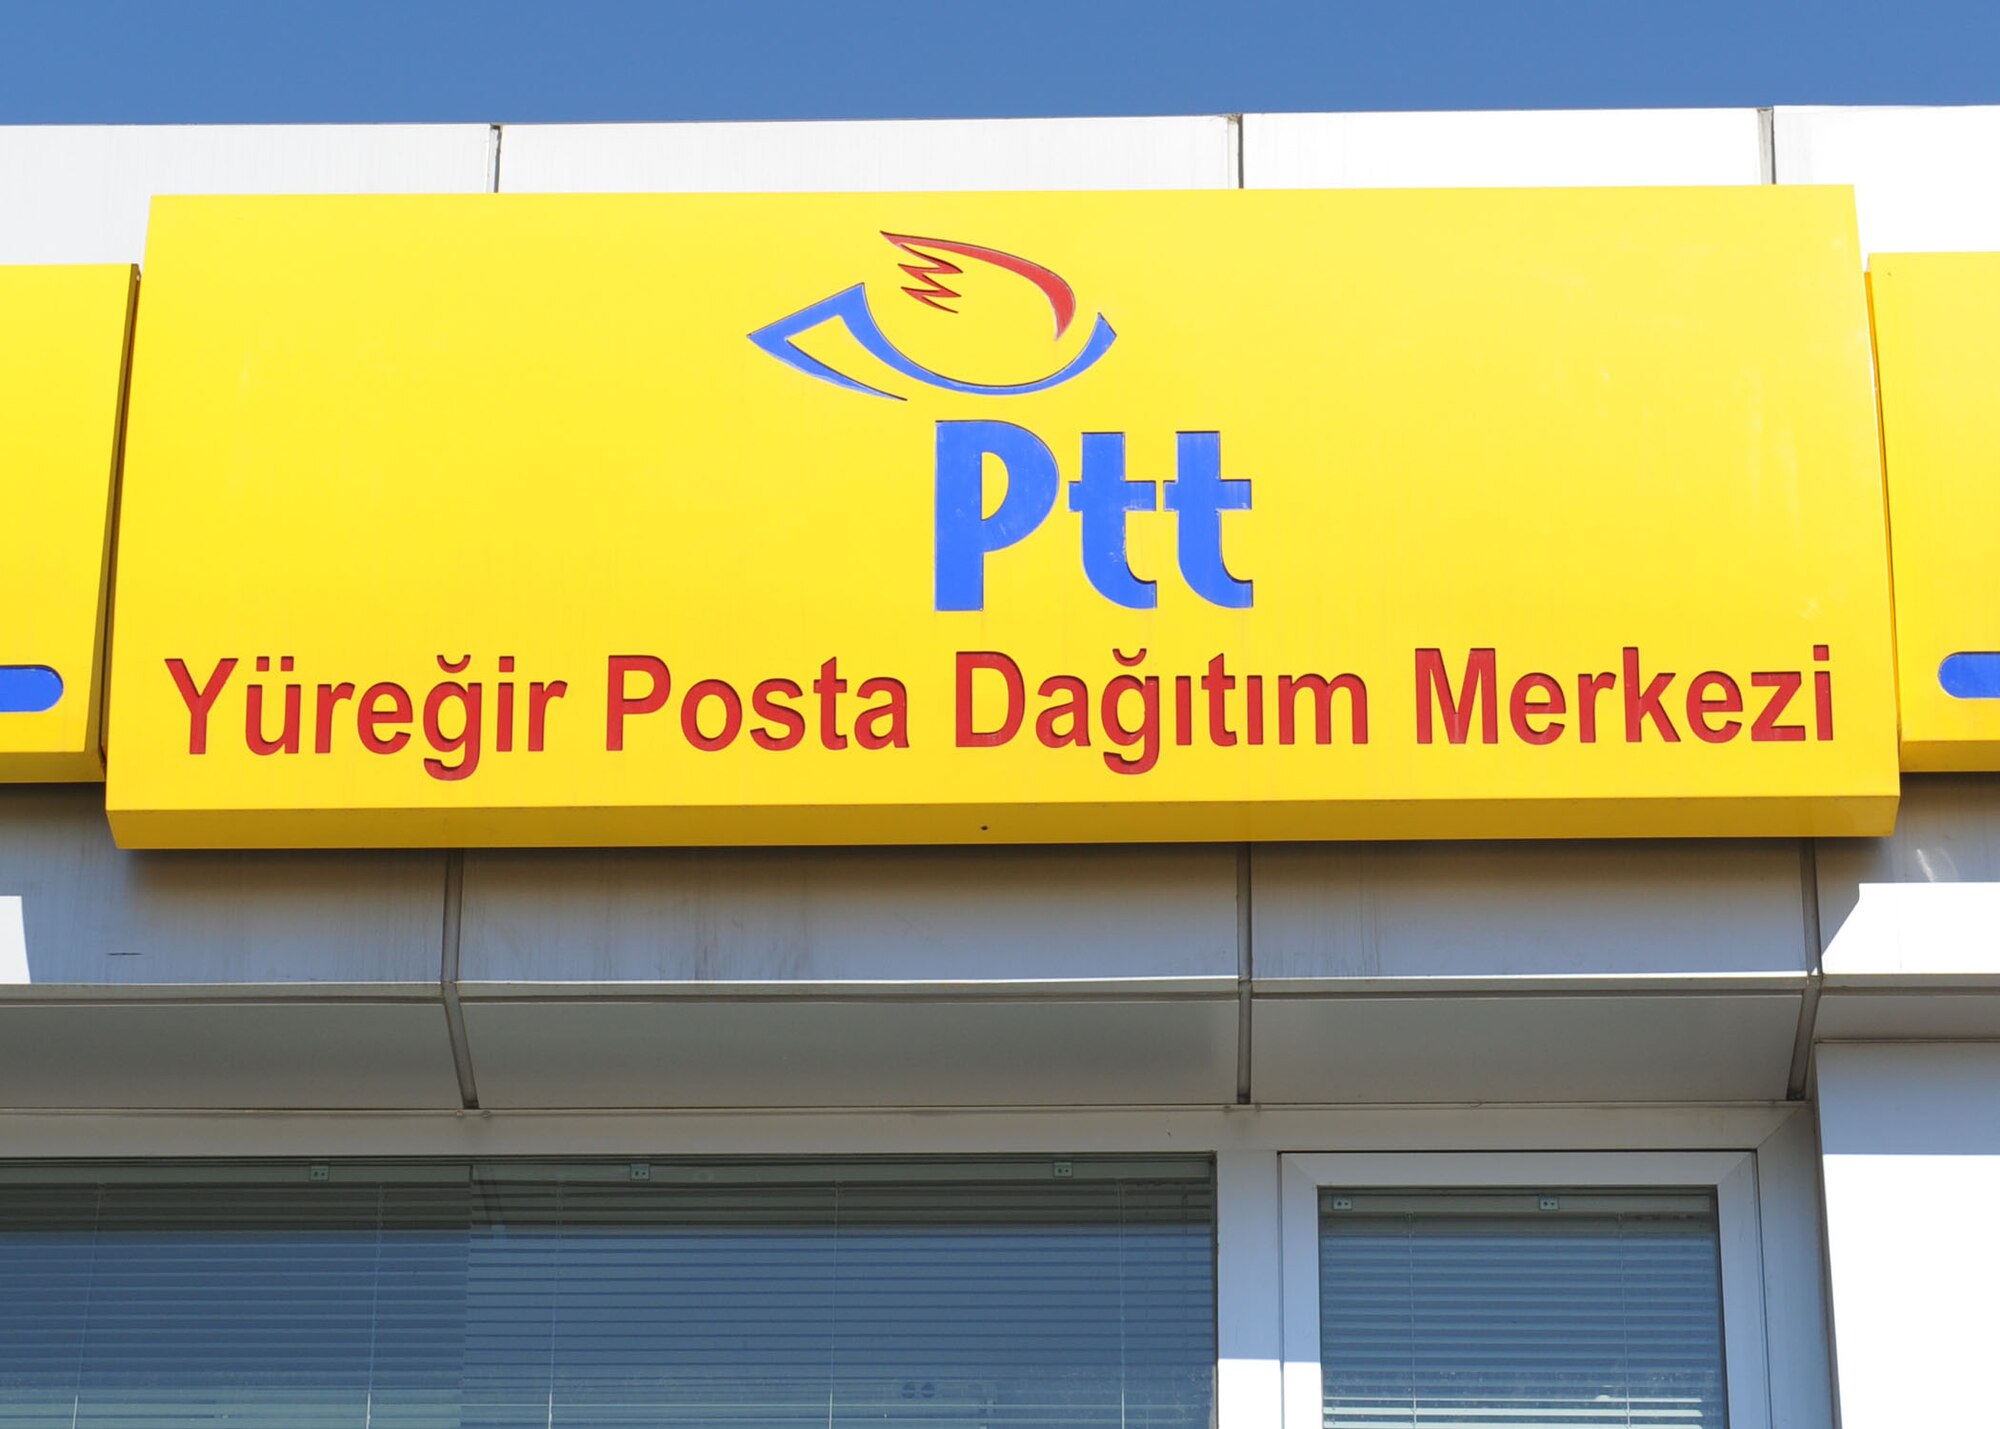 The Post, telephone and telegraph (Ptt) facility located on the D400 is the most convenient location to purchase a Hizli Geçis Sistemi (HGS) toll card sticker, which is necessary to pay for tolls when driving on the Autobahn in Turkey. To assist in obtaining the sticker, the Community Center offers a shuttle to the facility on Thursdays for a nominal fee. (U.S. Air Force photo by Staff Sgt. Marissa Tucker/Released)